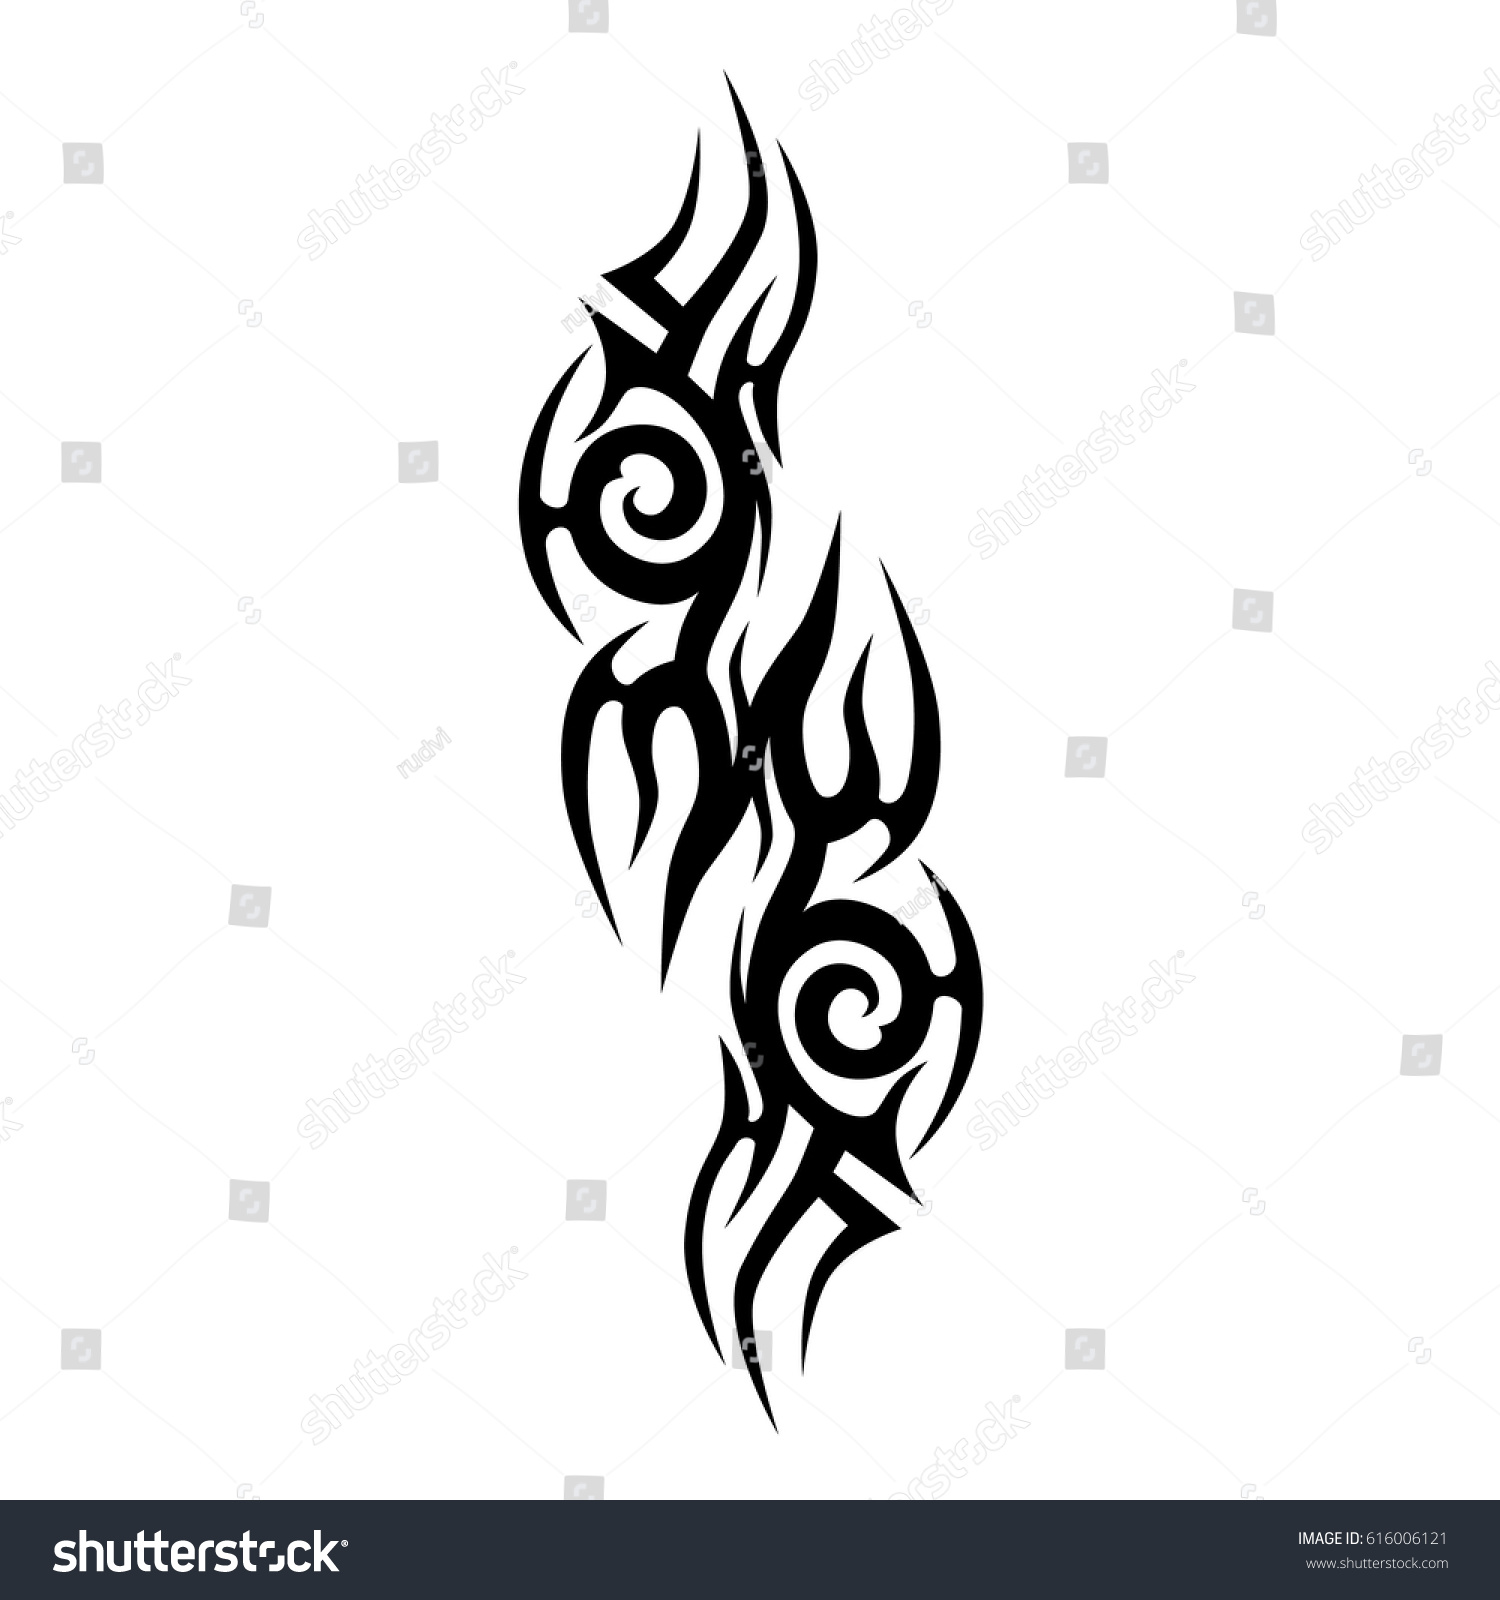 Tribal Tattoo Art Designs Sketched Simple Stock Vector 616006121 ...